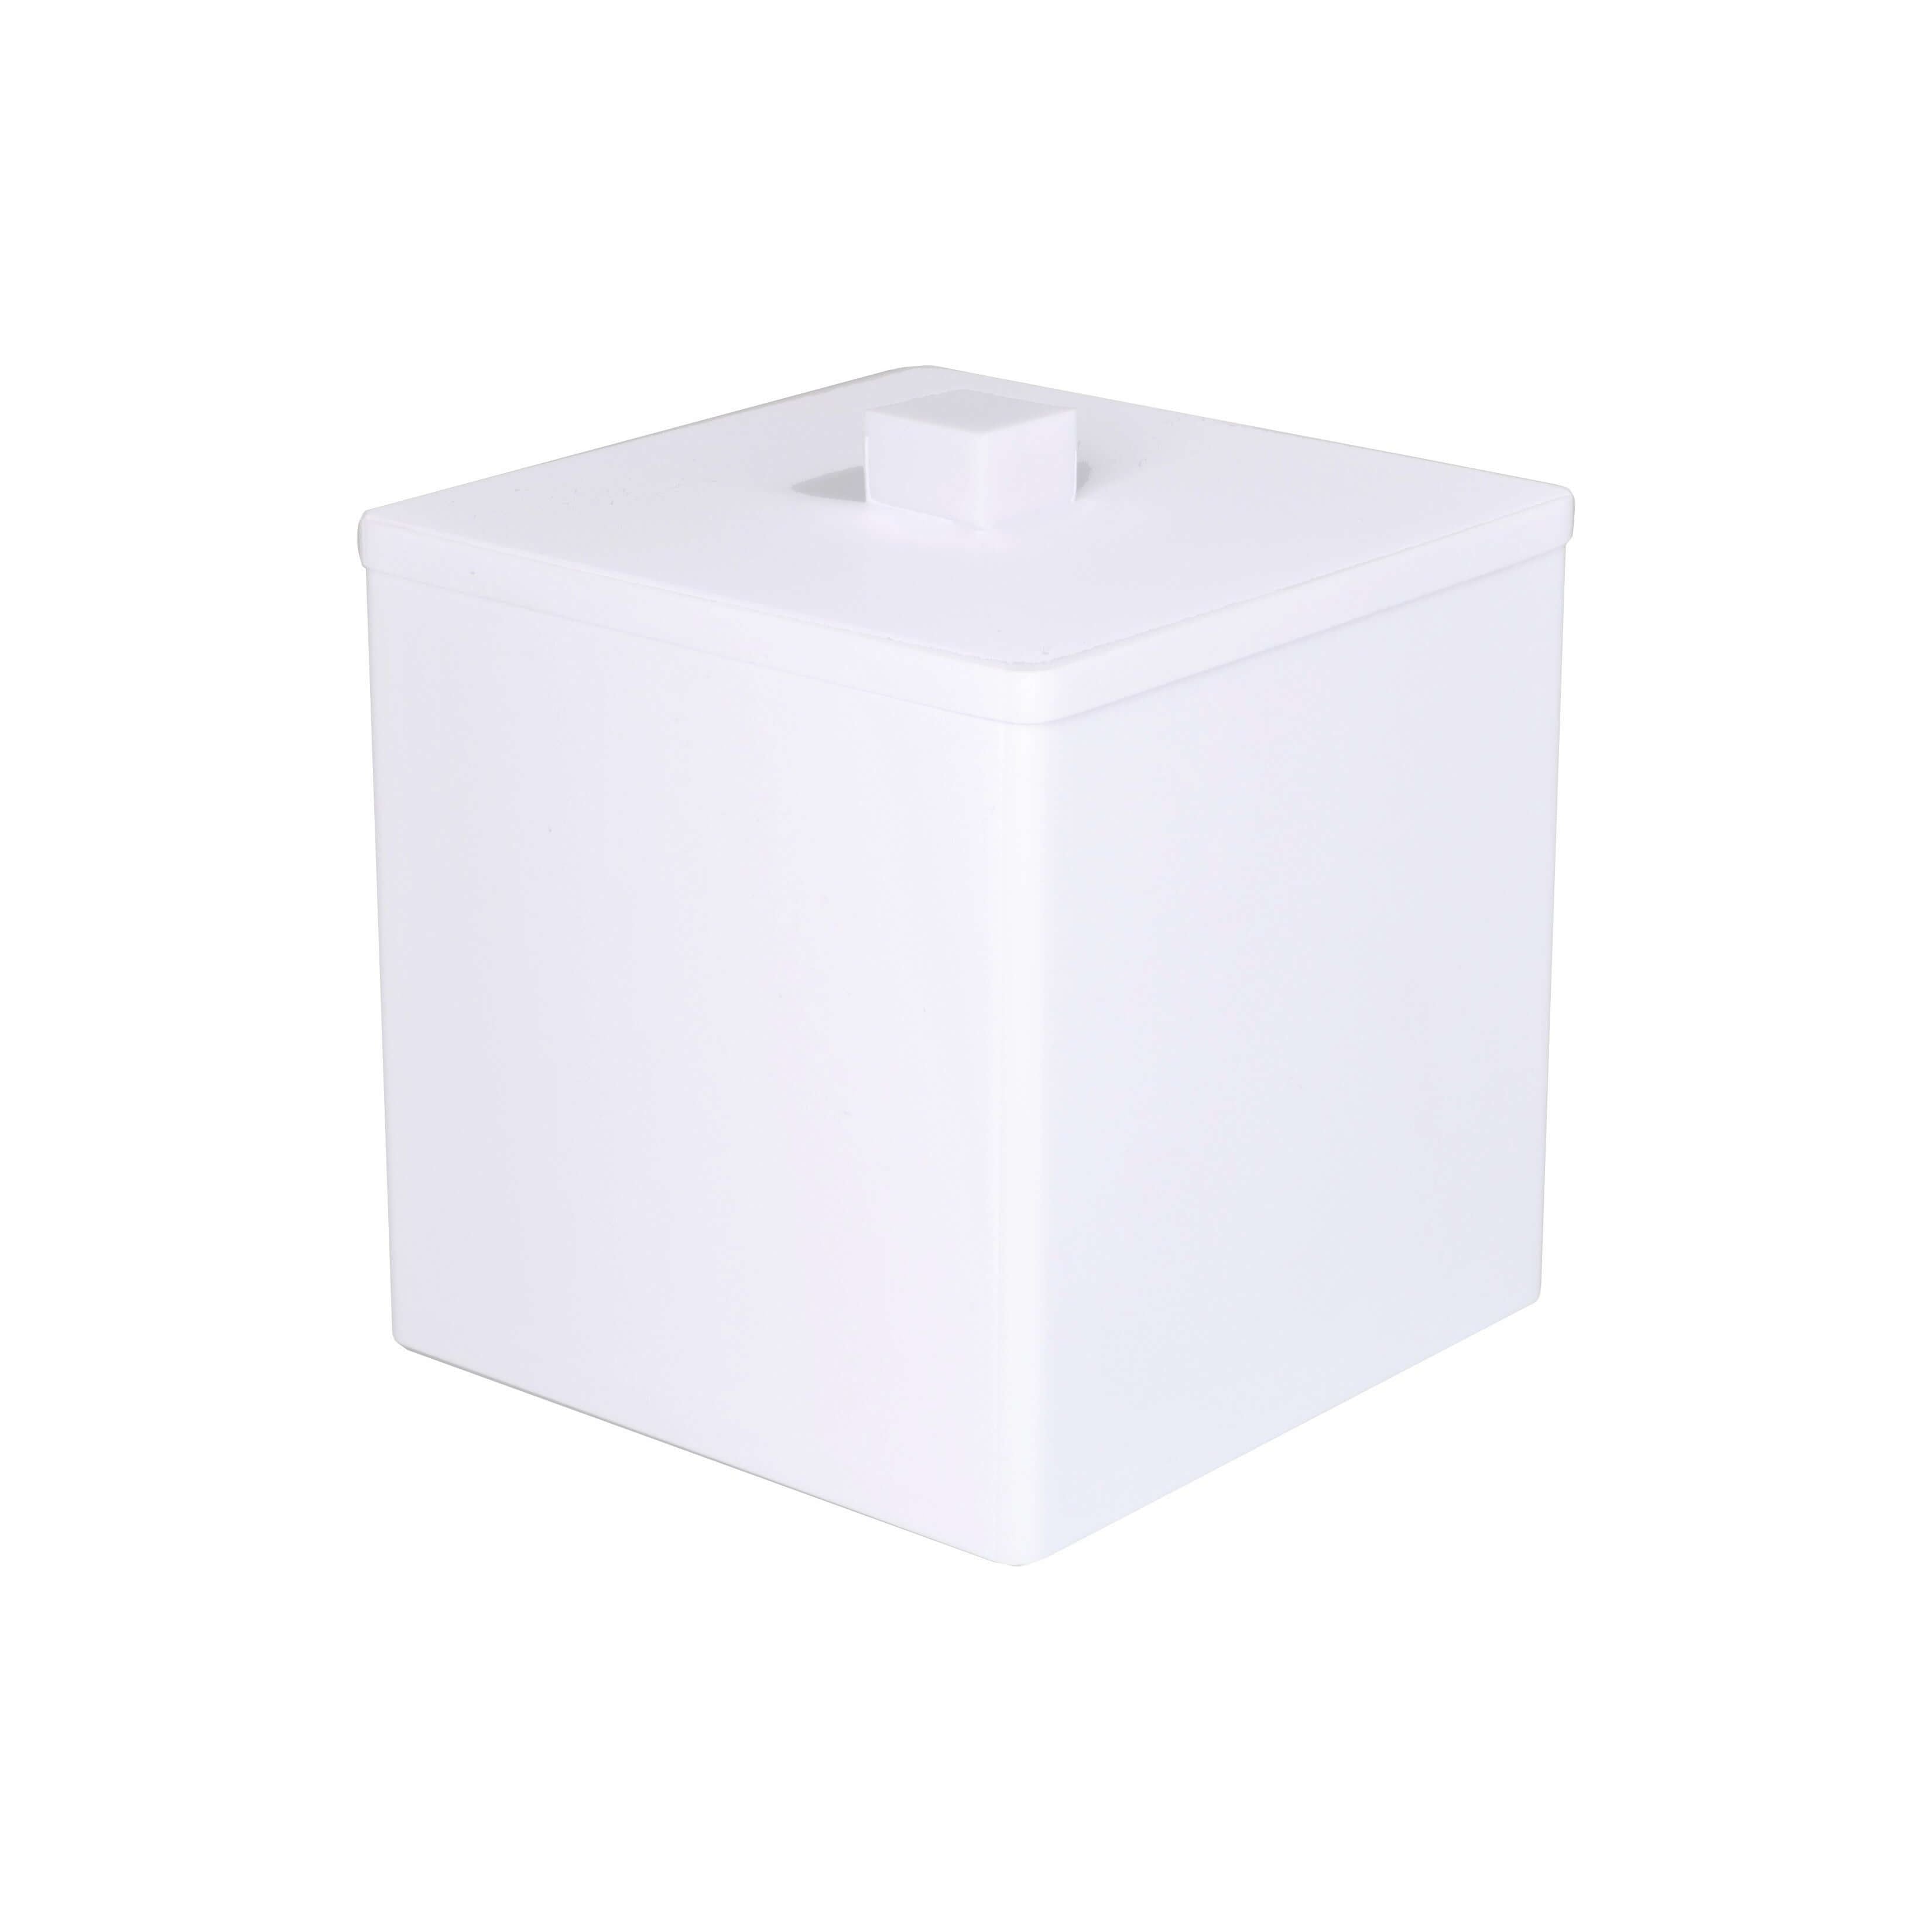 Mike + Ally - Contours Container - 52033 - White - 